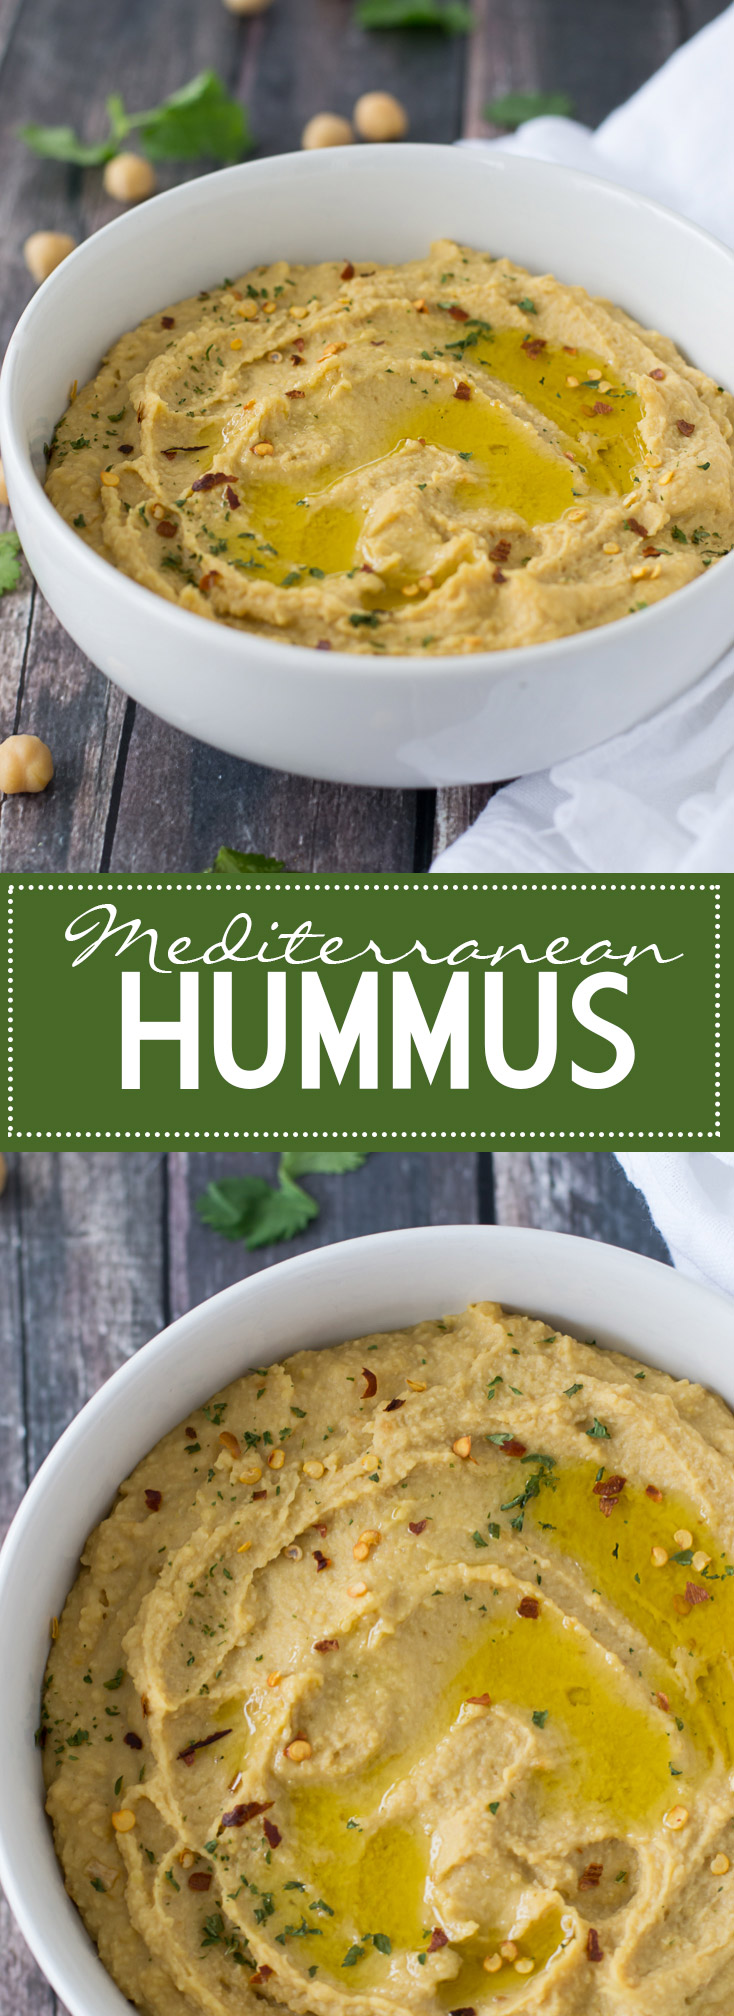 An eas and delicious recipe for Mediterranean Hummus - no tahini required! 